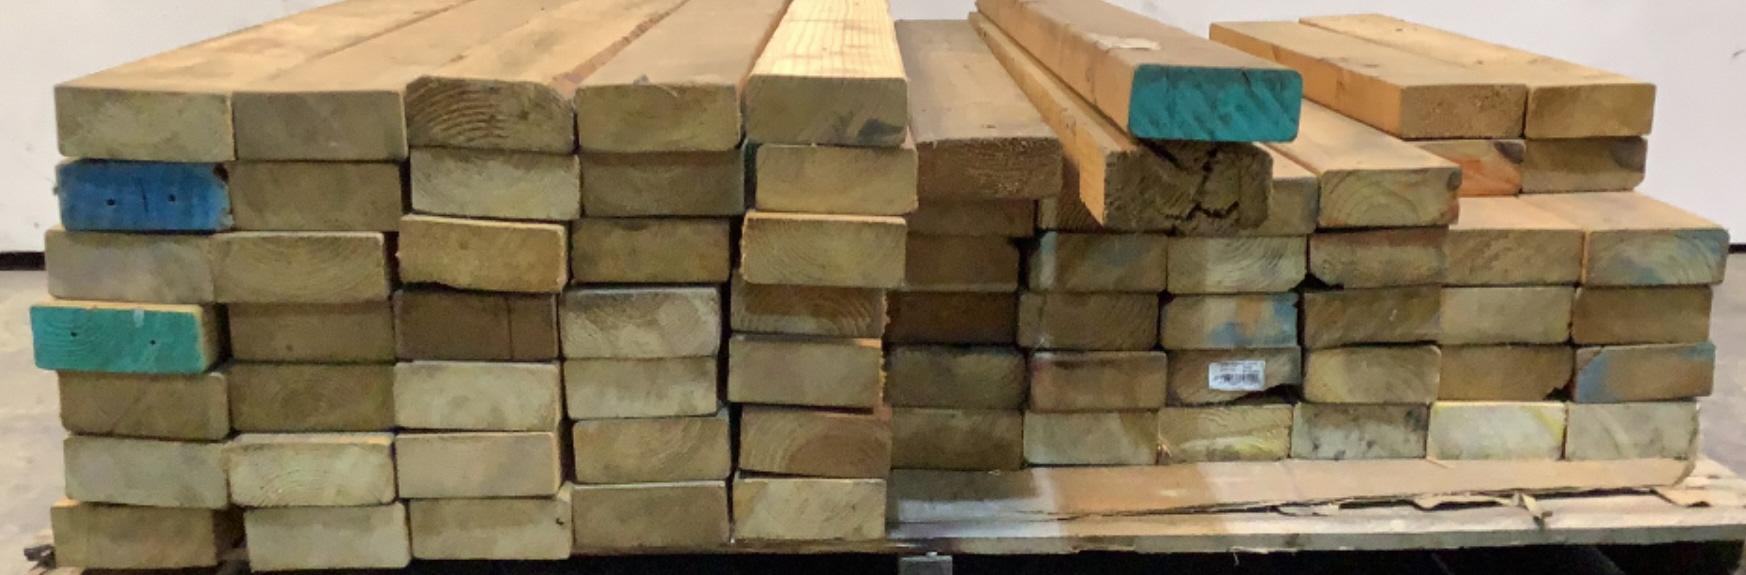 Assorted 2X4 Planks